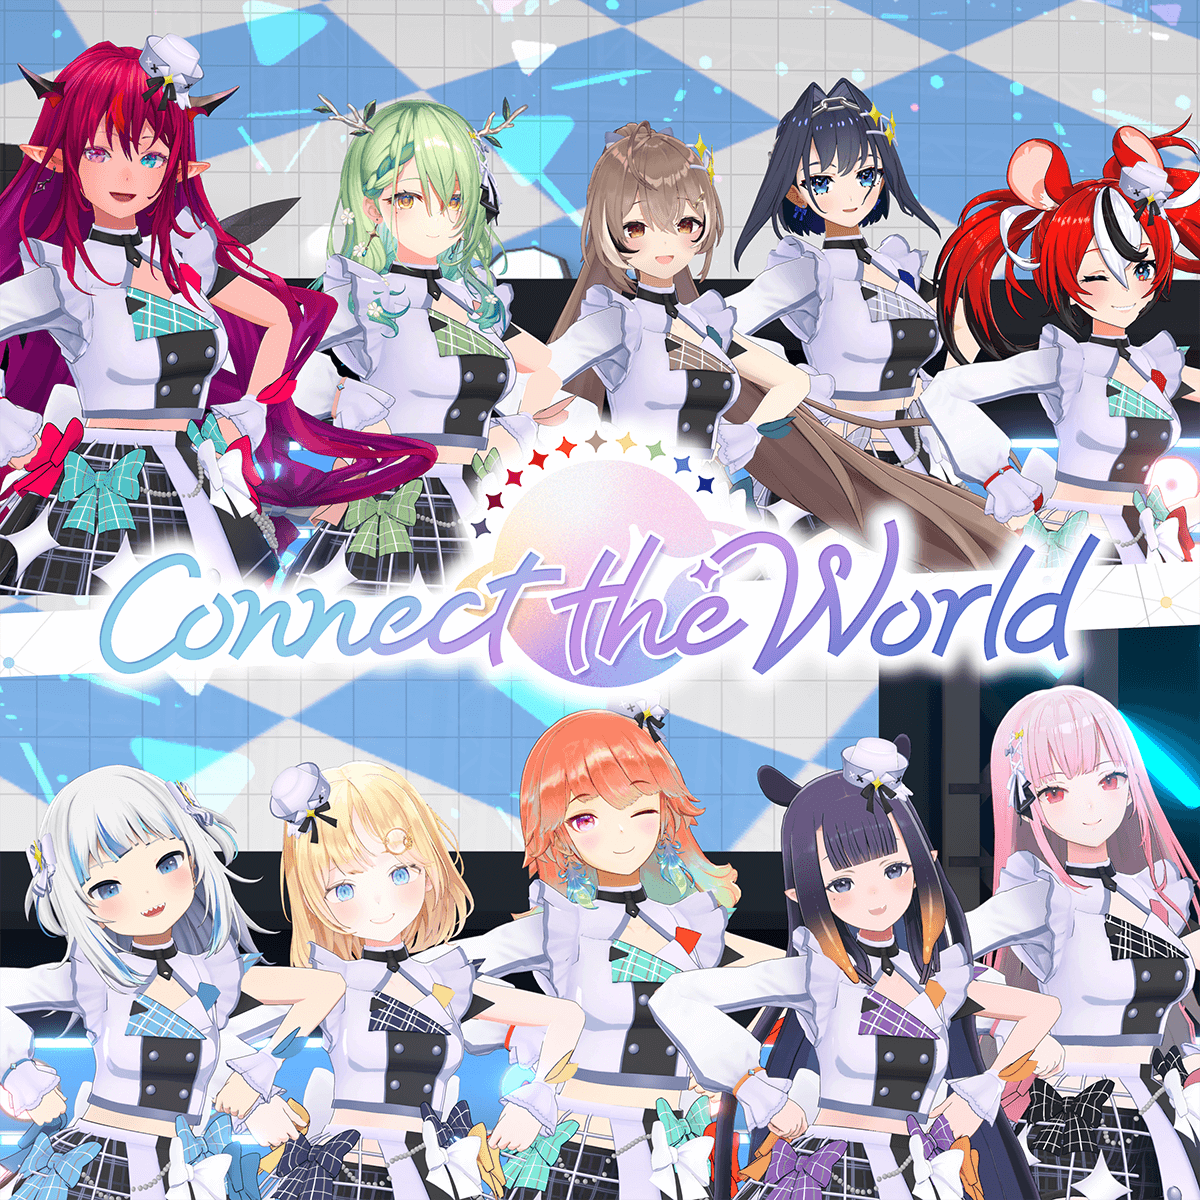 hololive English 1st Concert -Connect the World- Original Song “Connect the World” Music Video Premiere and Single Release